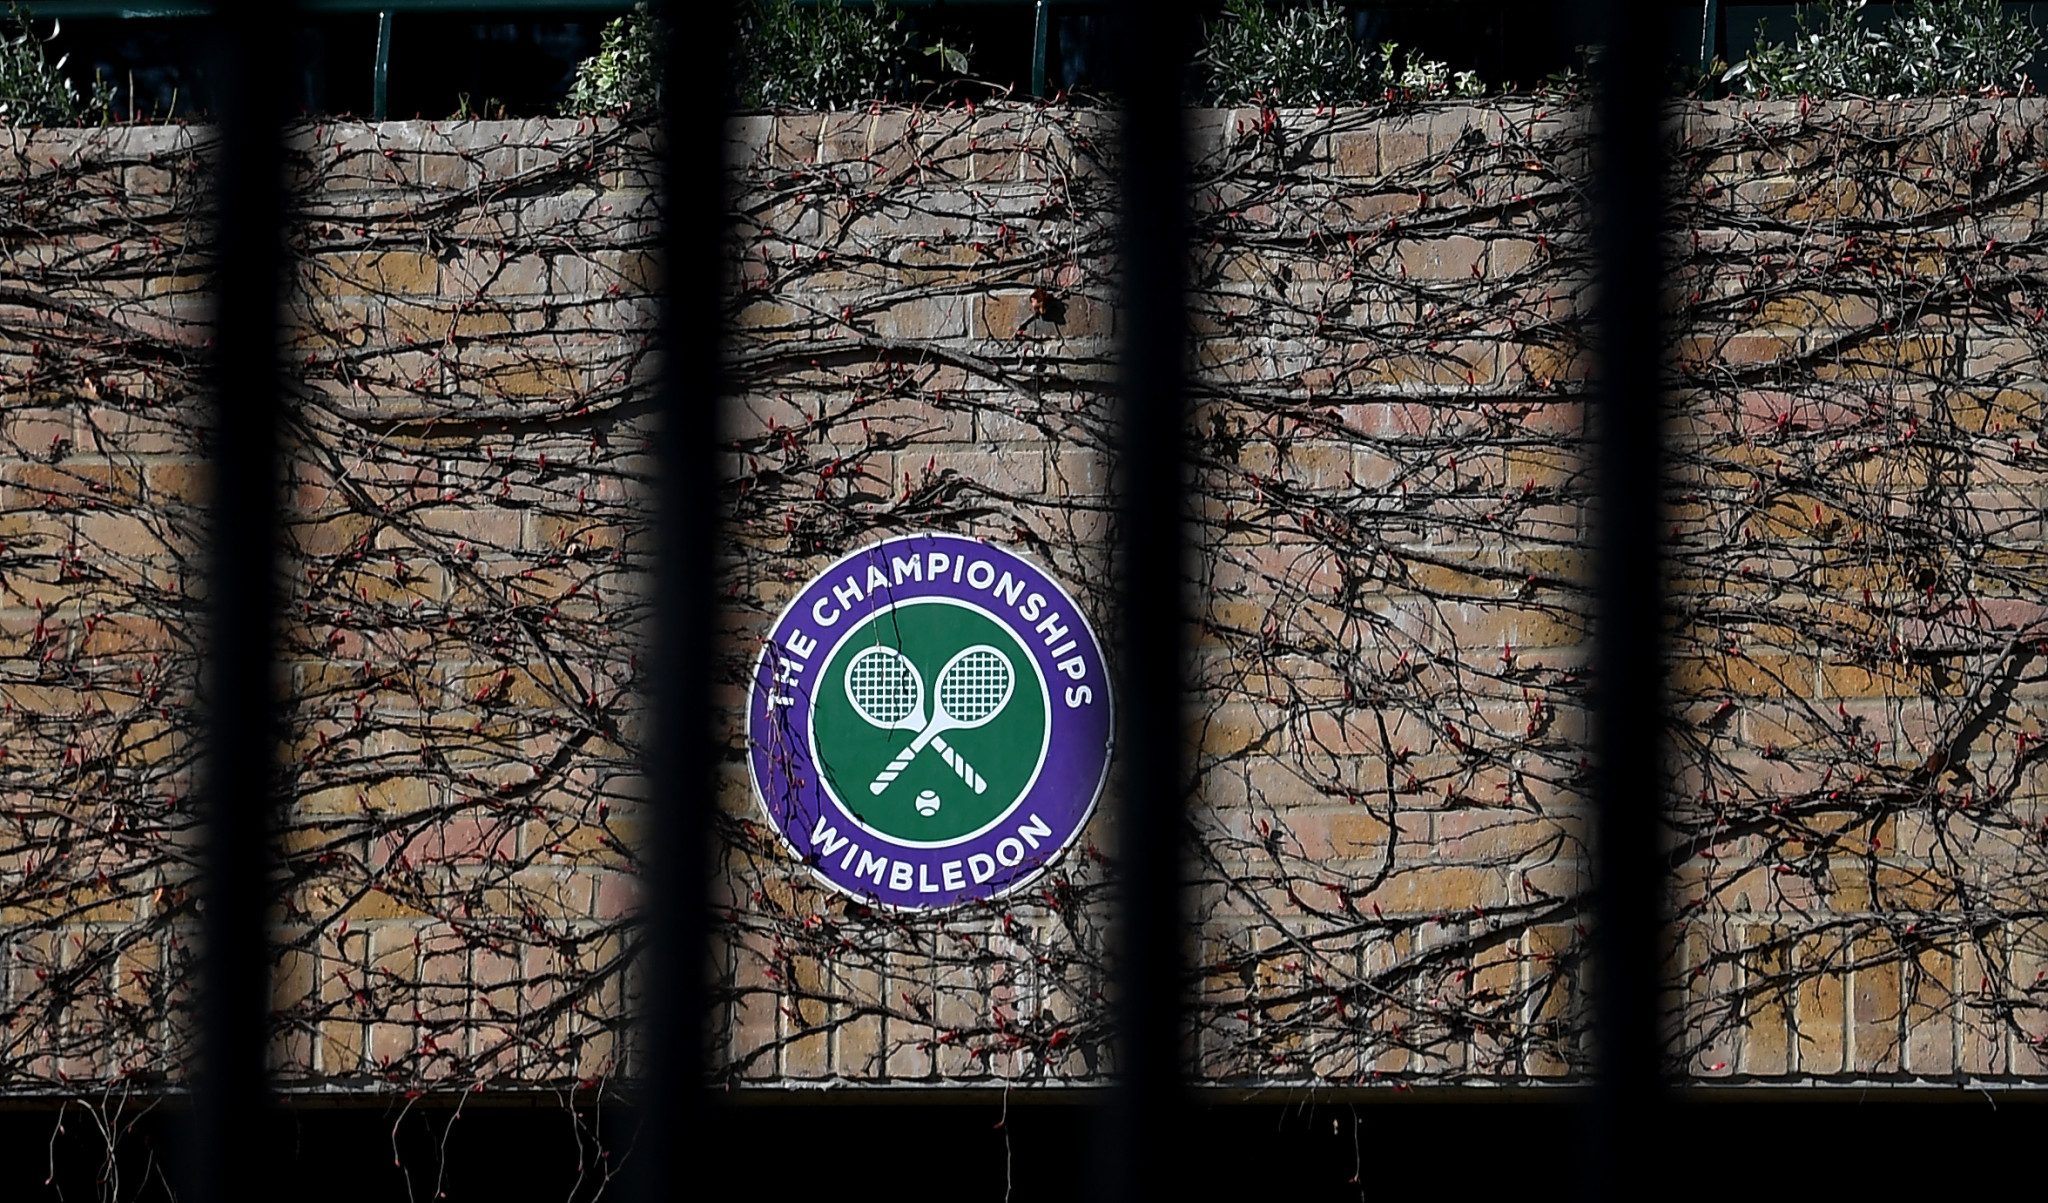 Wimbledon was cancelled in 2020 but there are hopes fans could return this year ©Getty Image